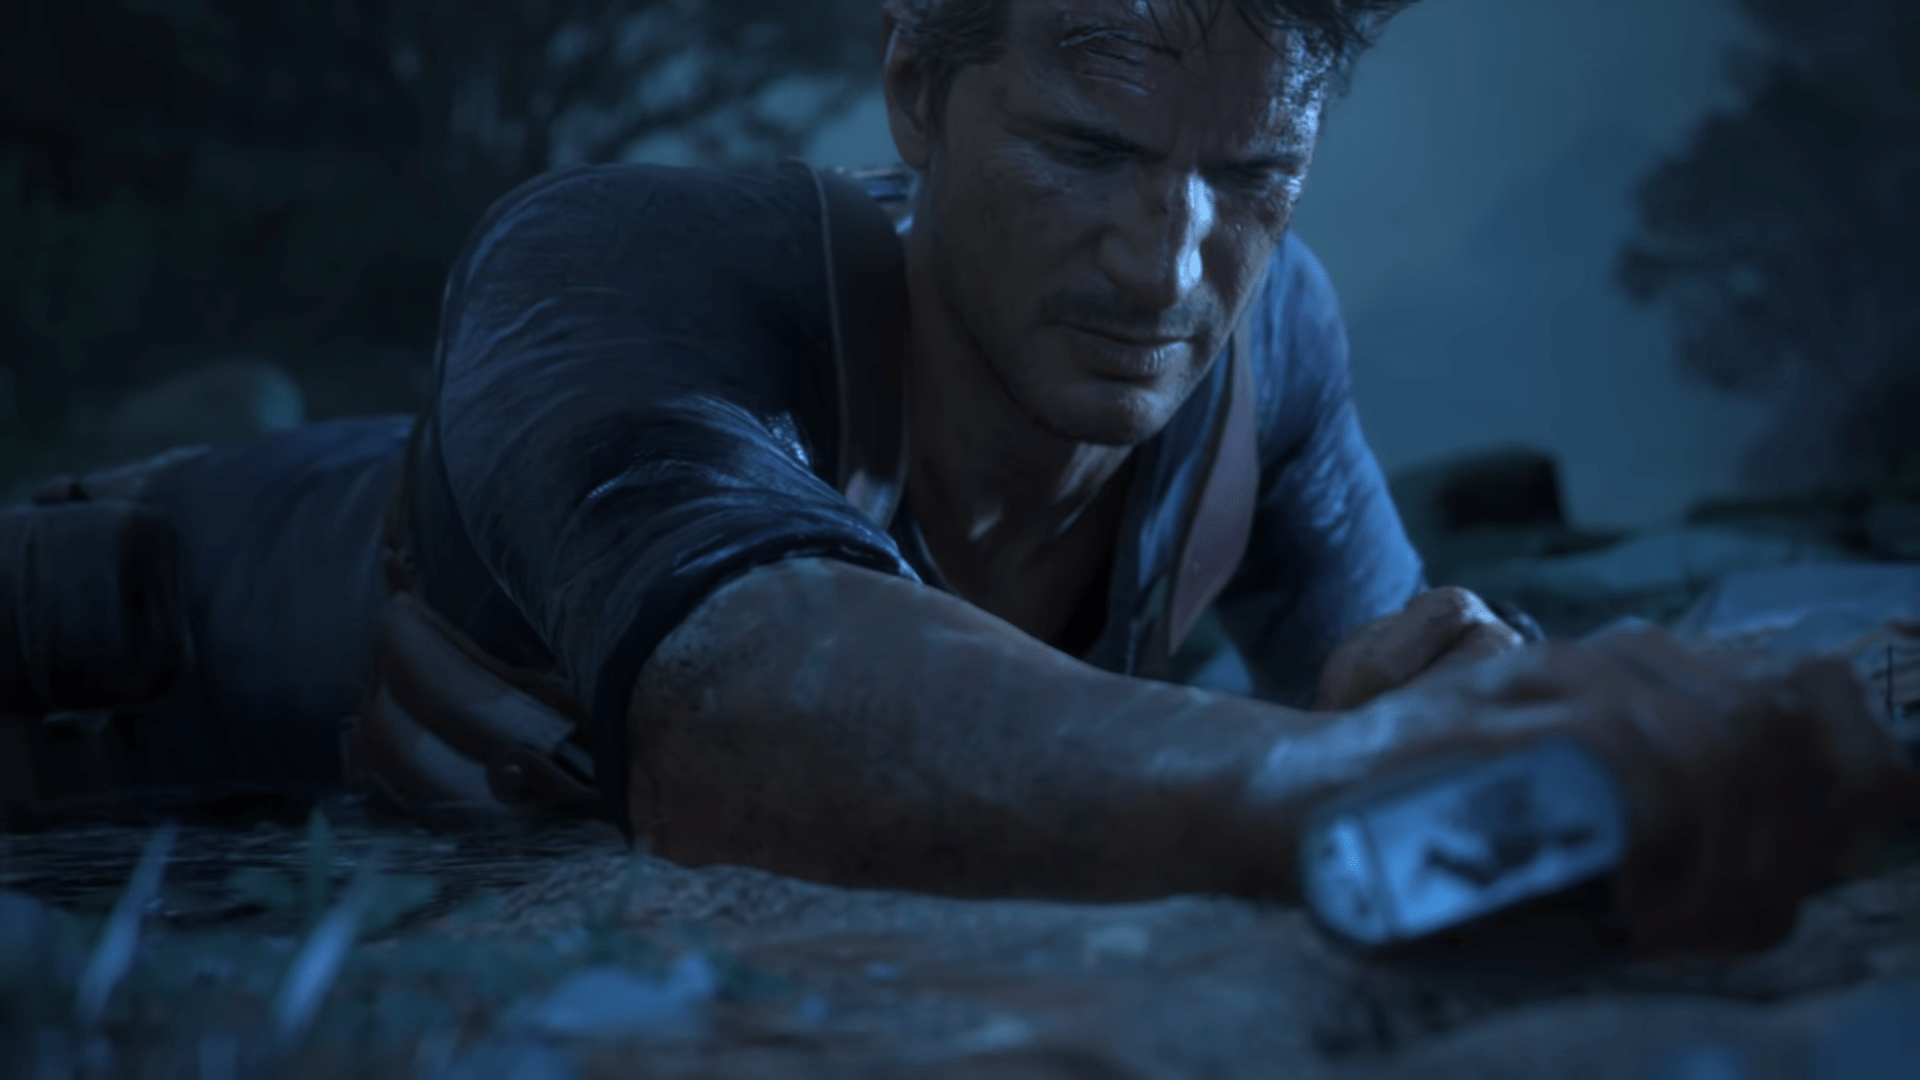 PlayStation 4 Users Begin To Predict May 2020’s Free Game Lineup As Announcement Date Approaches